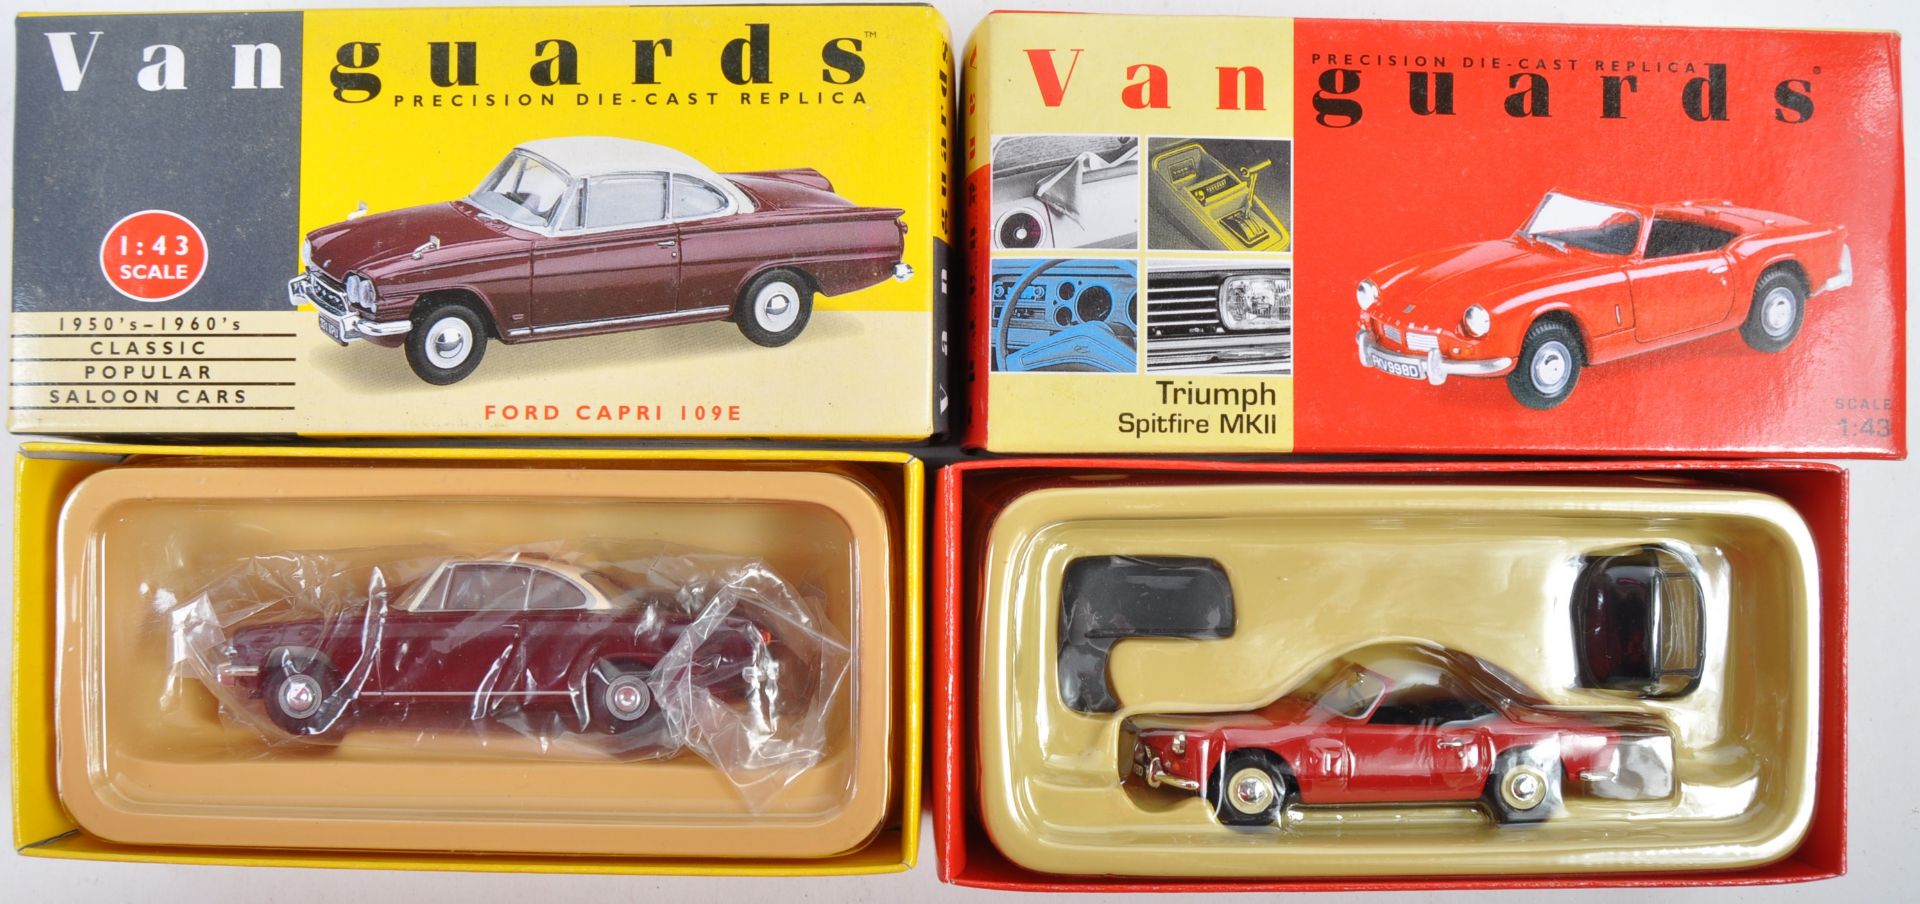 COLLECTION OF LLEDO VANGUARDS DIECAST MODELS VEHICLES - Image 6 of 6